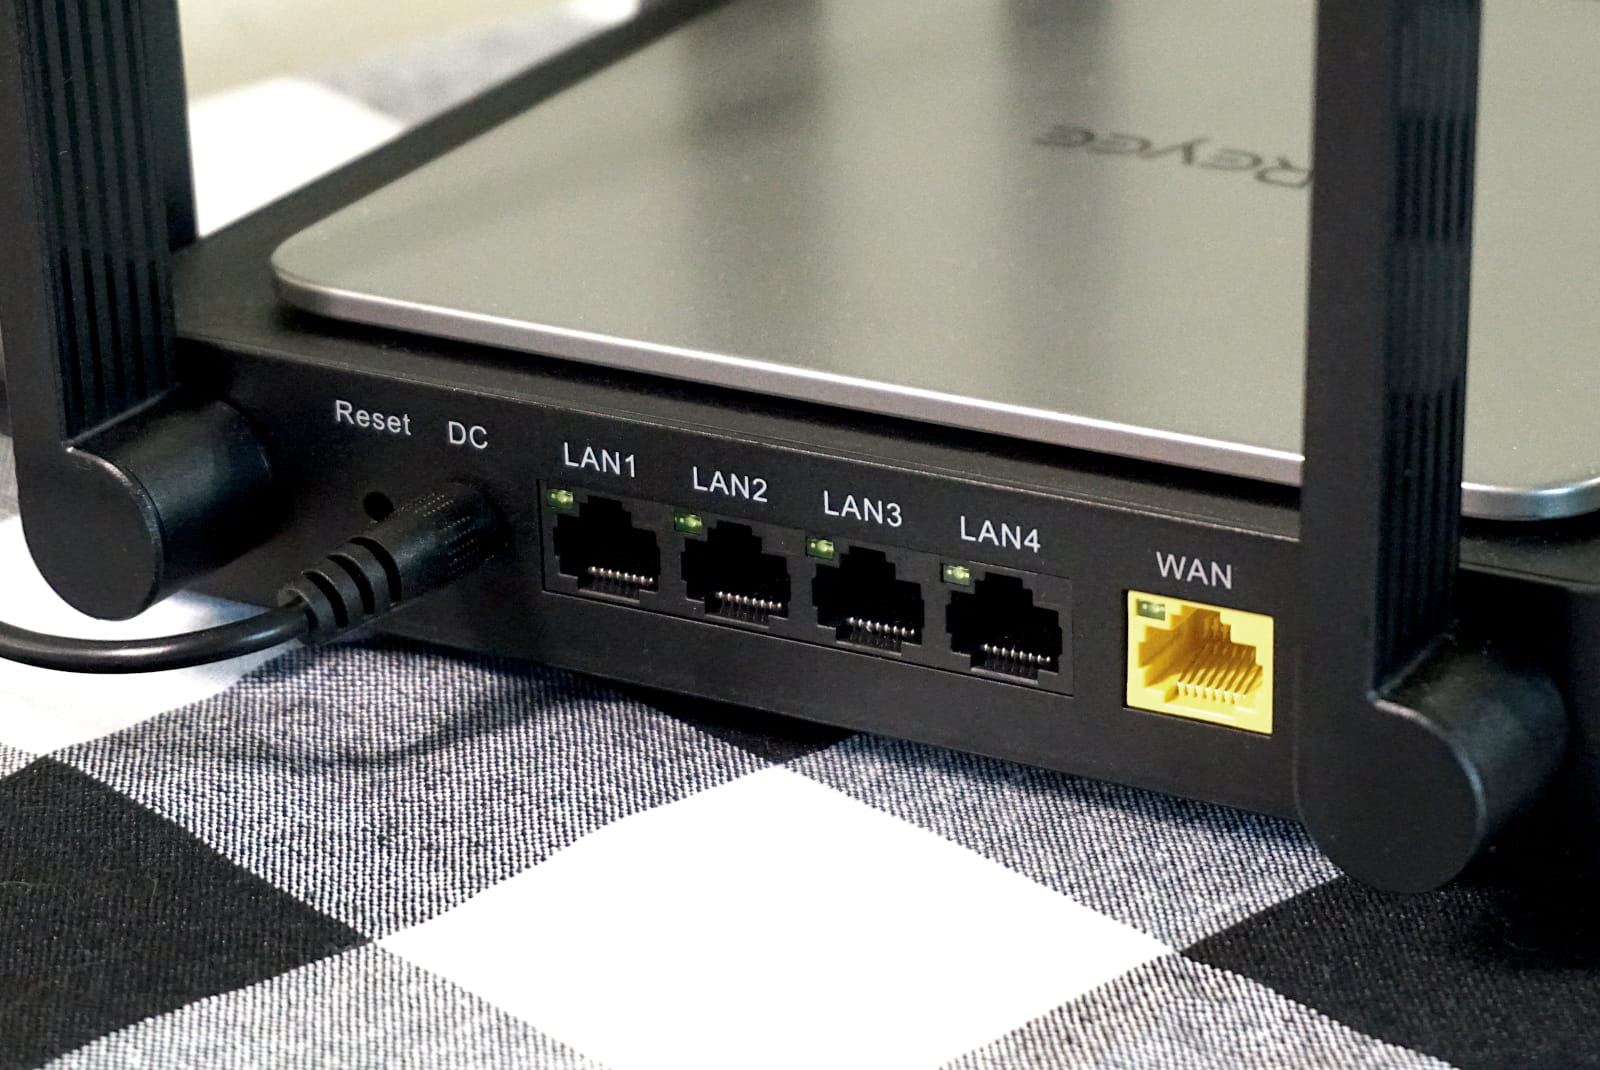 Four LAN ports and one WAN port of Reyee RG-E5 router